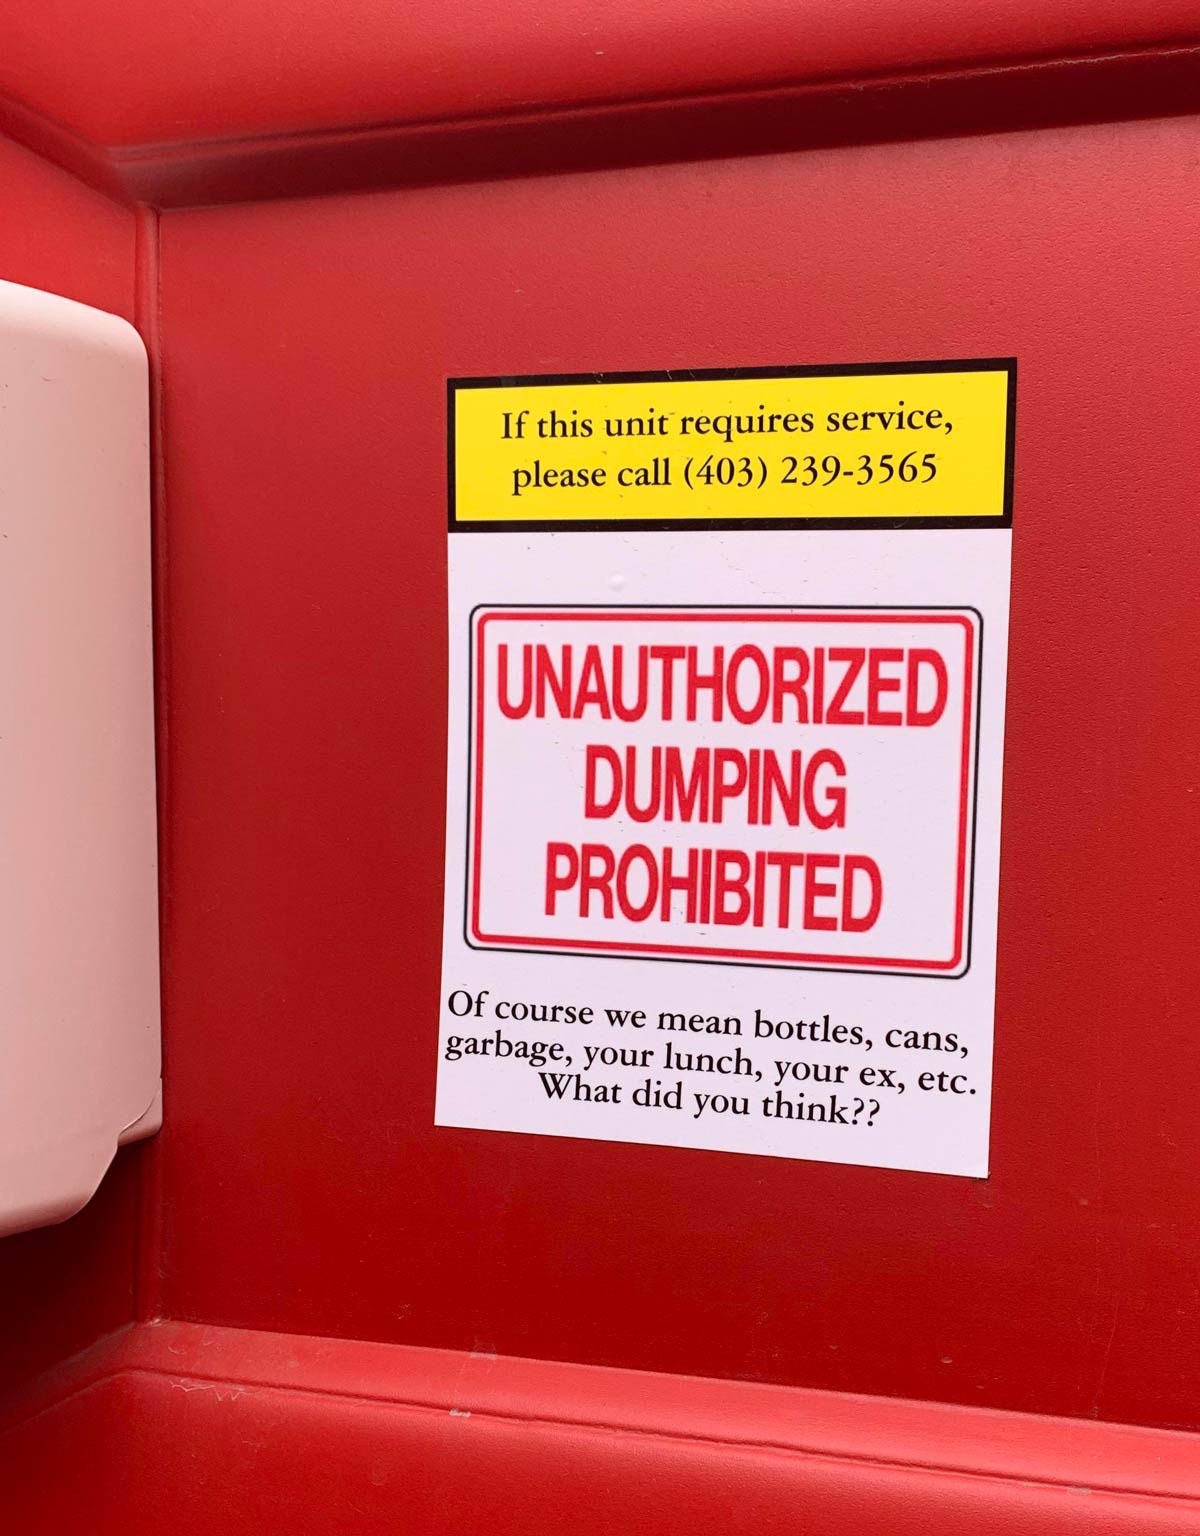 In the porta potty at my job